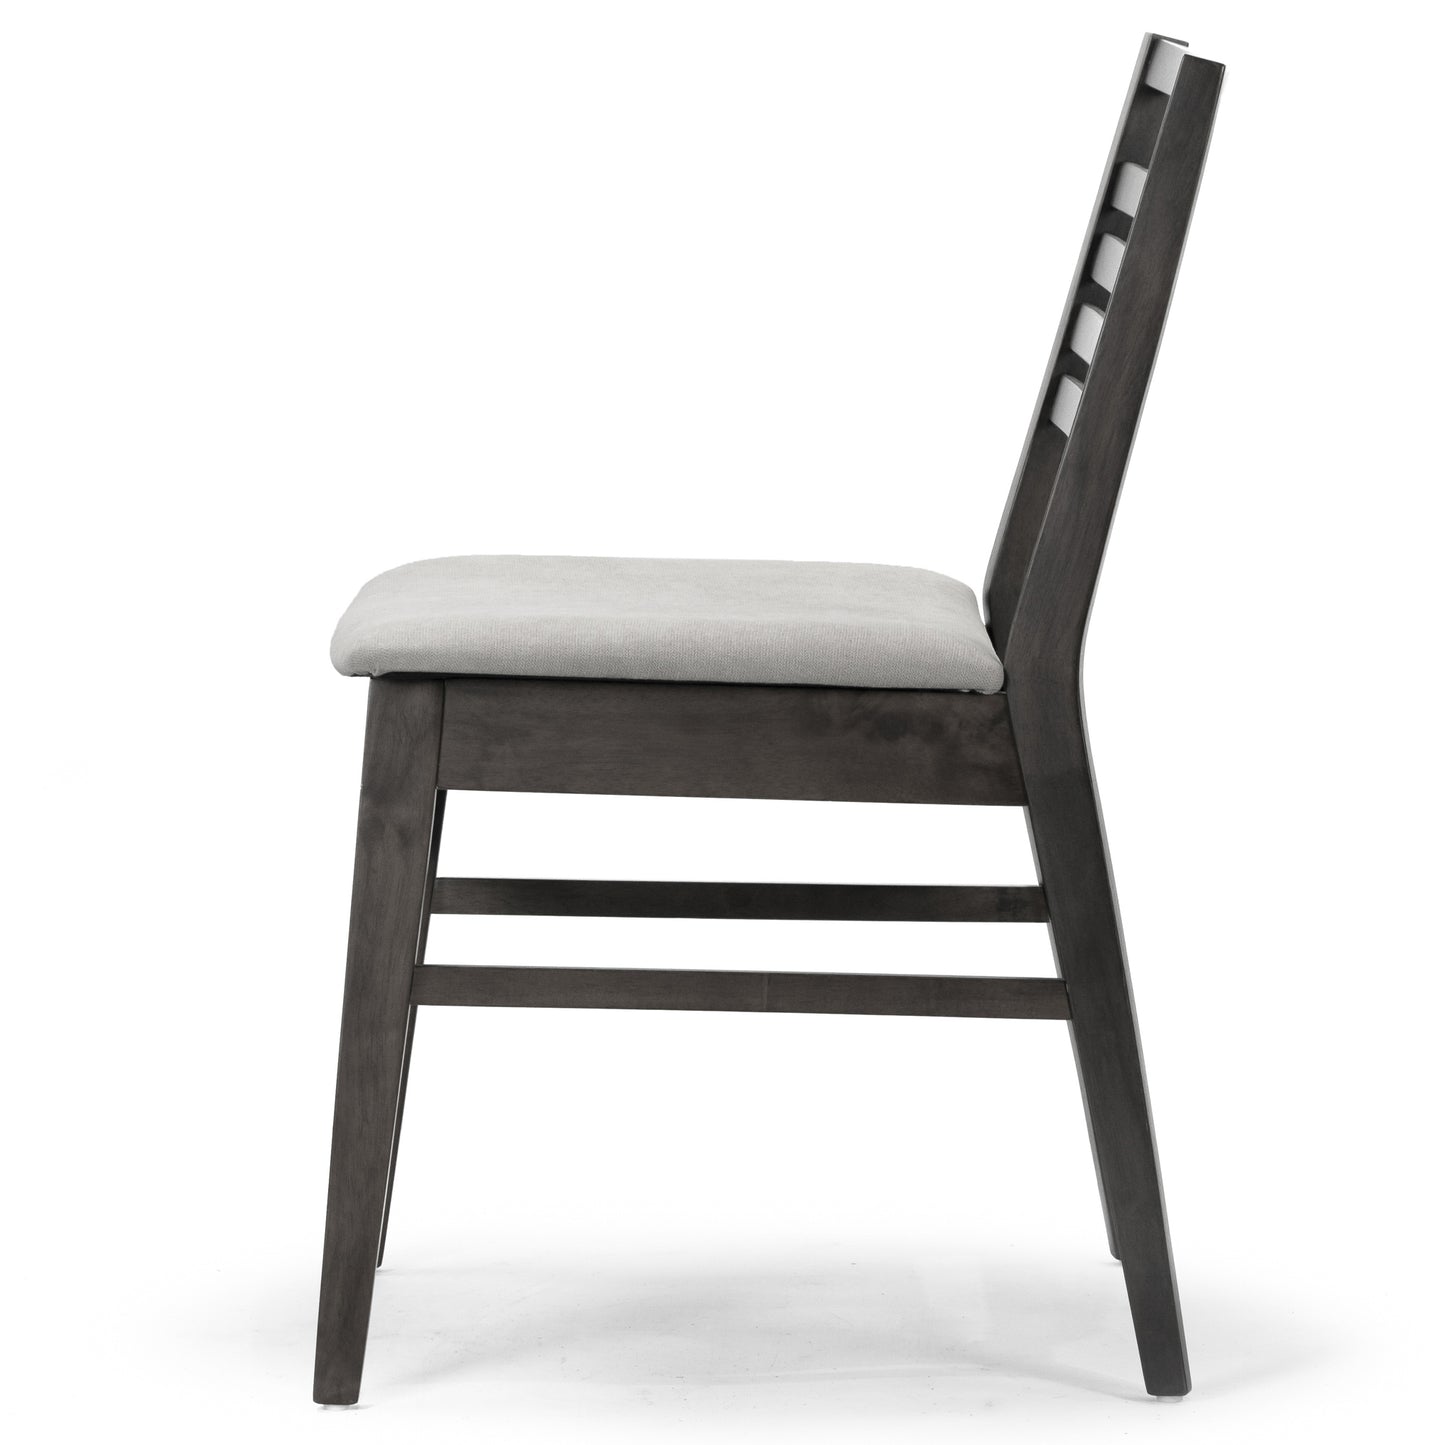 Set of 2 Audrey Black Wood Chair with Light Grey Fabric Seat and Ladder Back